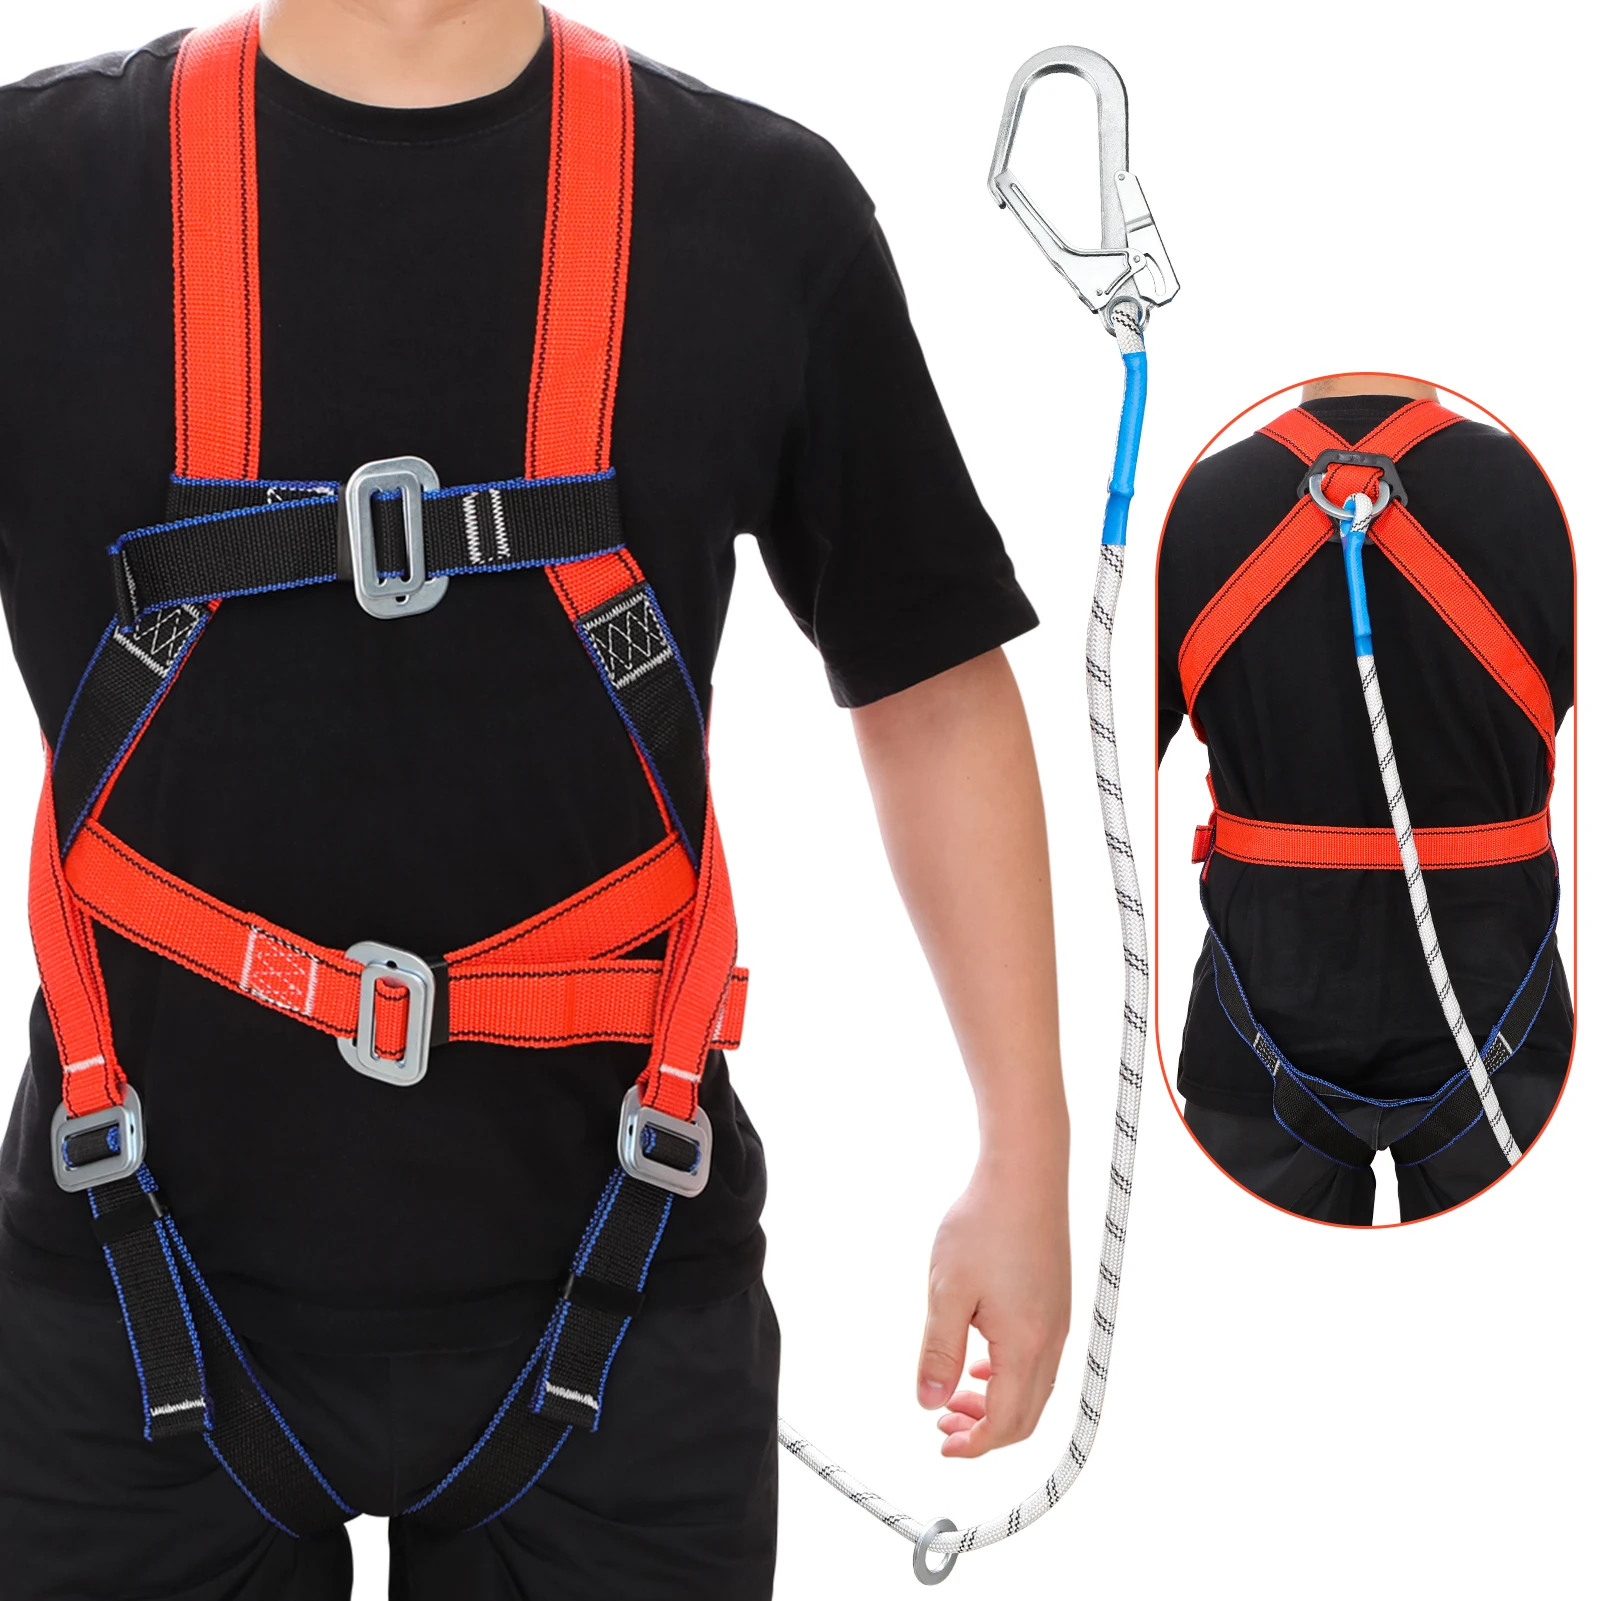 

Safety Roofing Harness with Hook with High Load Bearing Capacity Design for Air-conditioning Installation